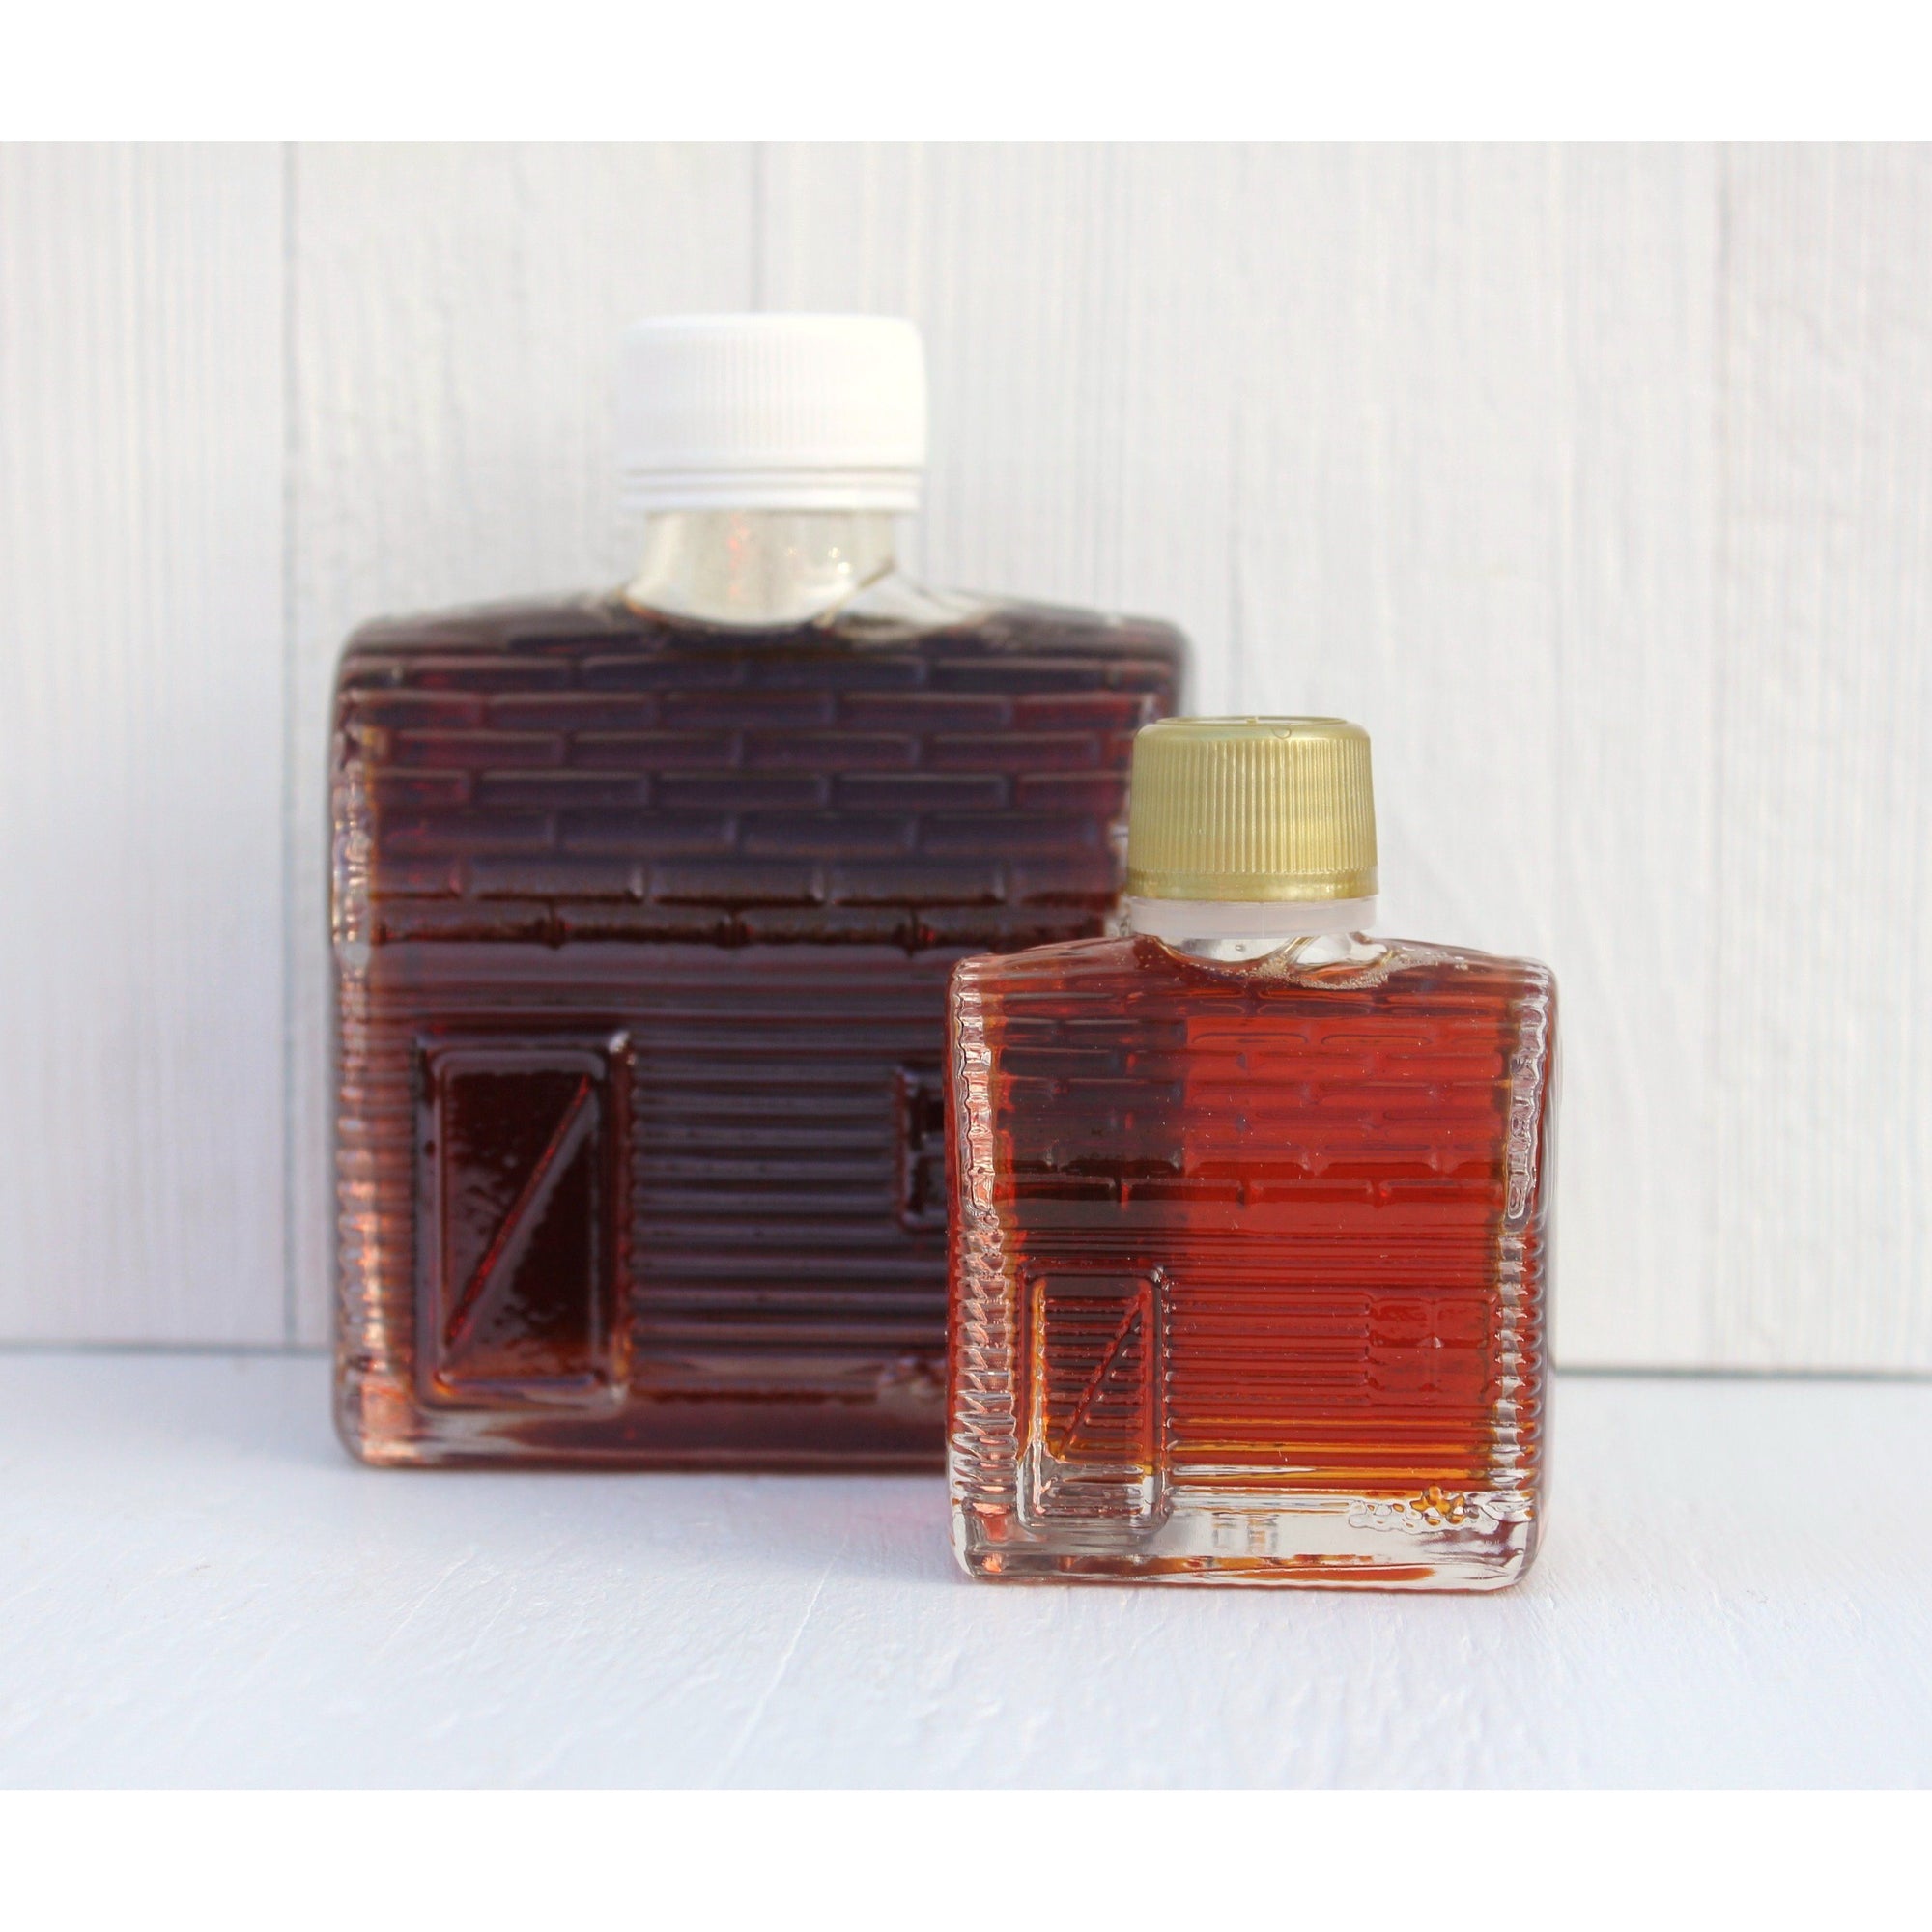 GLASS CABIN MAPLE SYRUP HOLIDAY GIFT BOTTLE